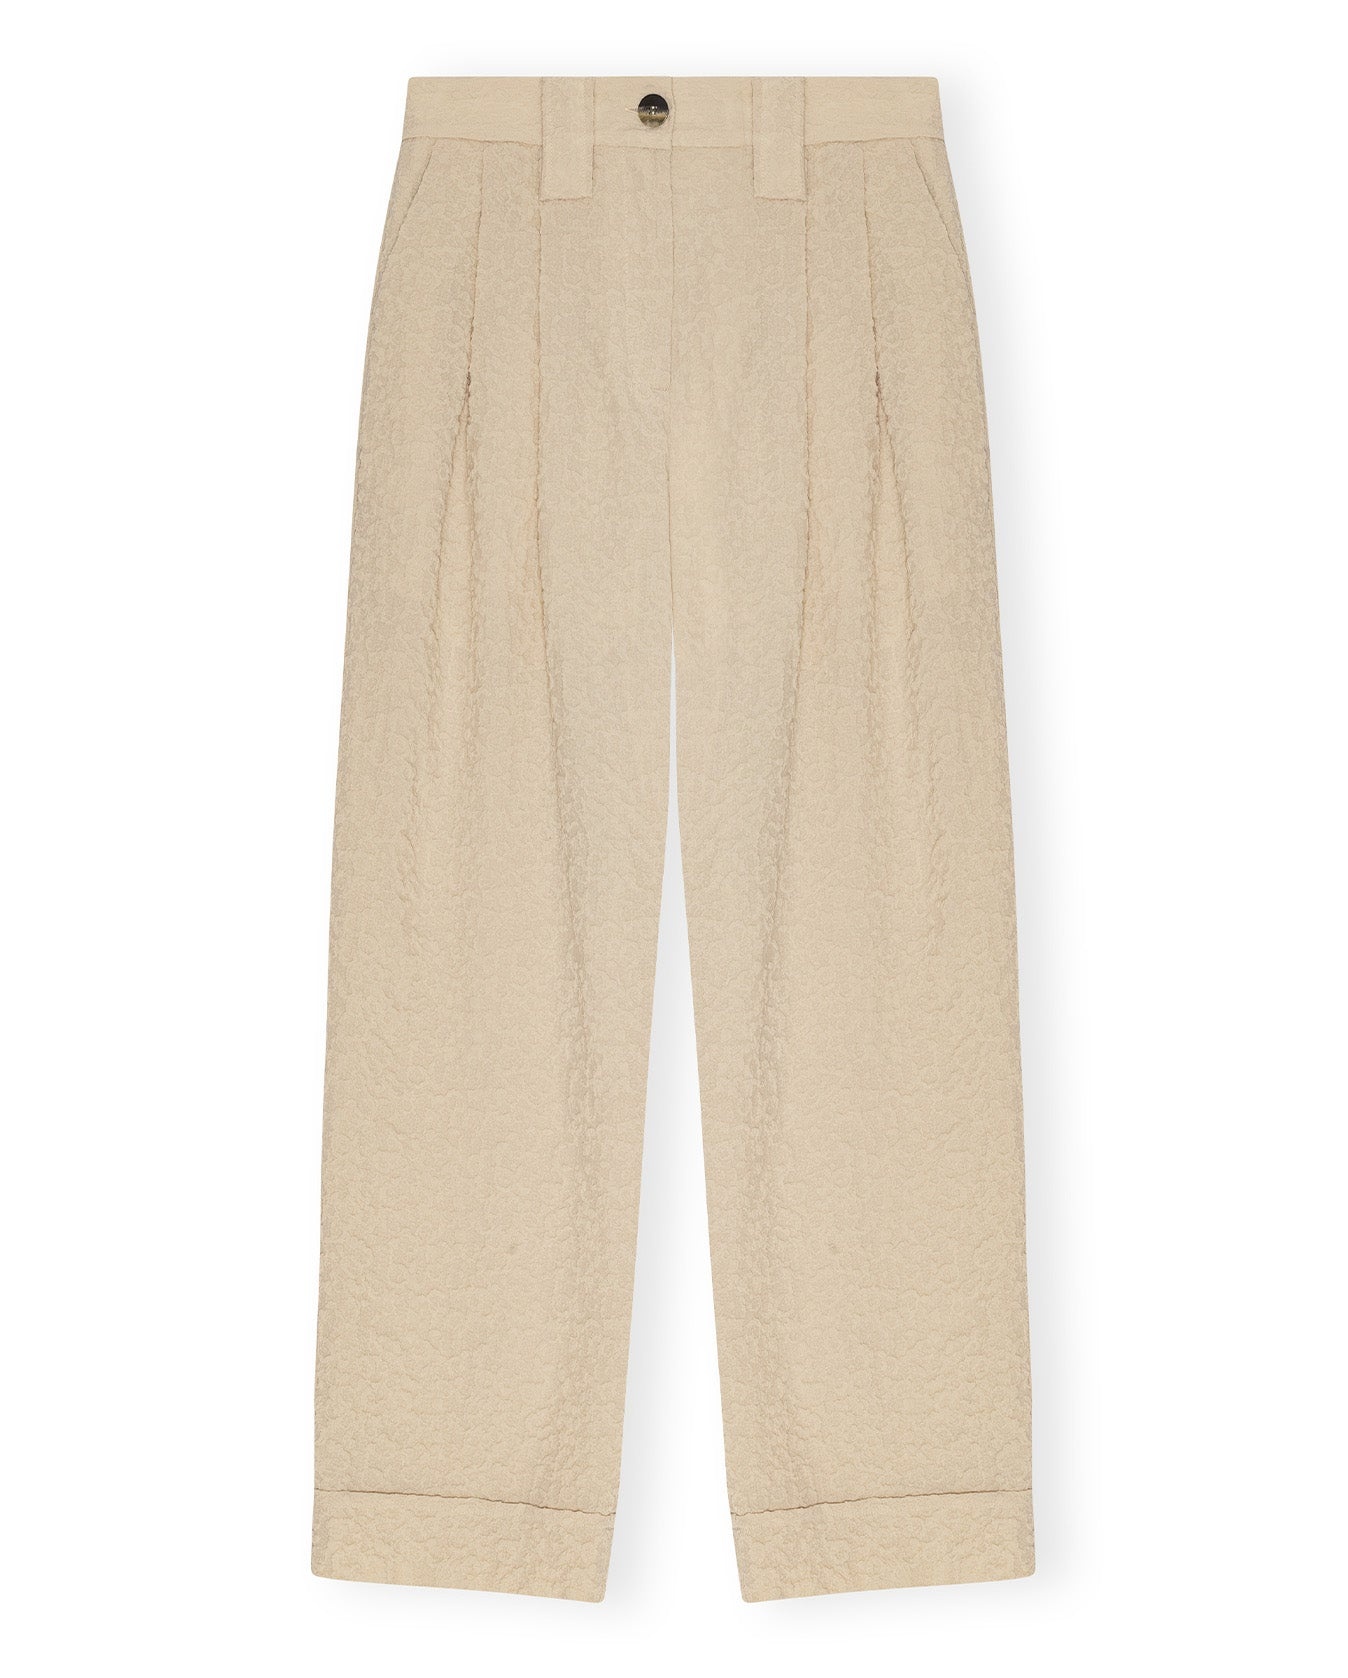 Textured Suiting Mid Waist Pants - 6